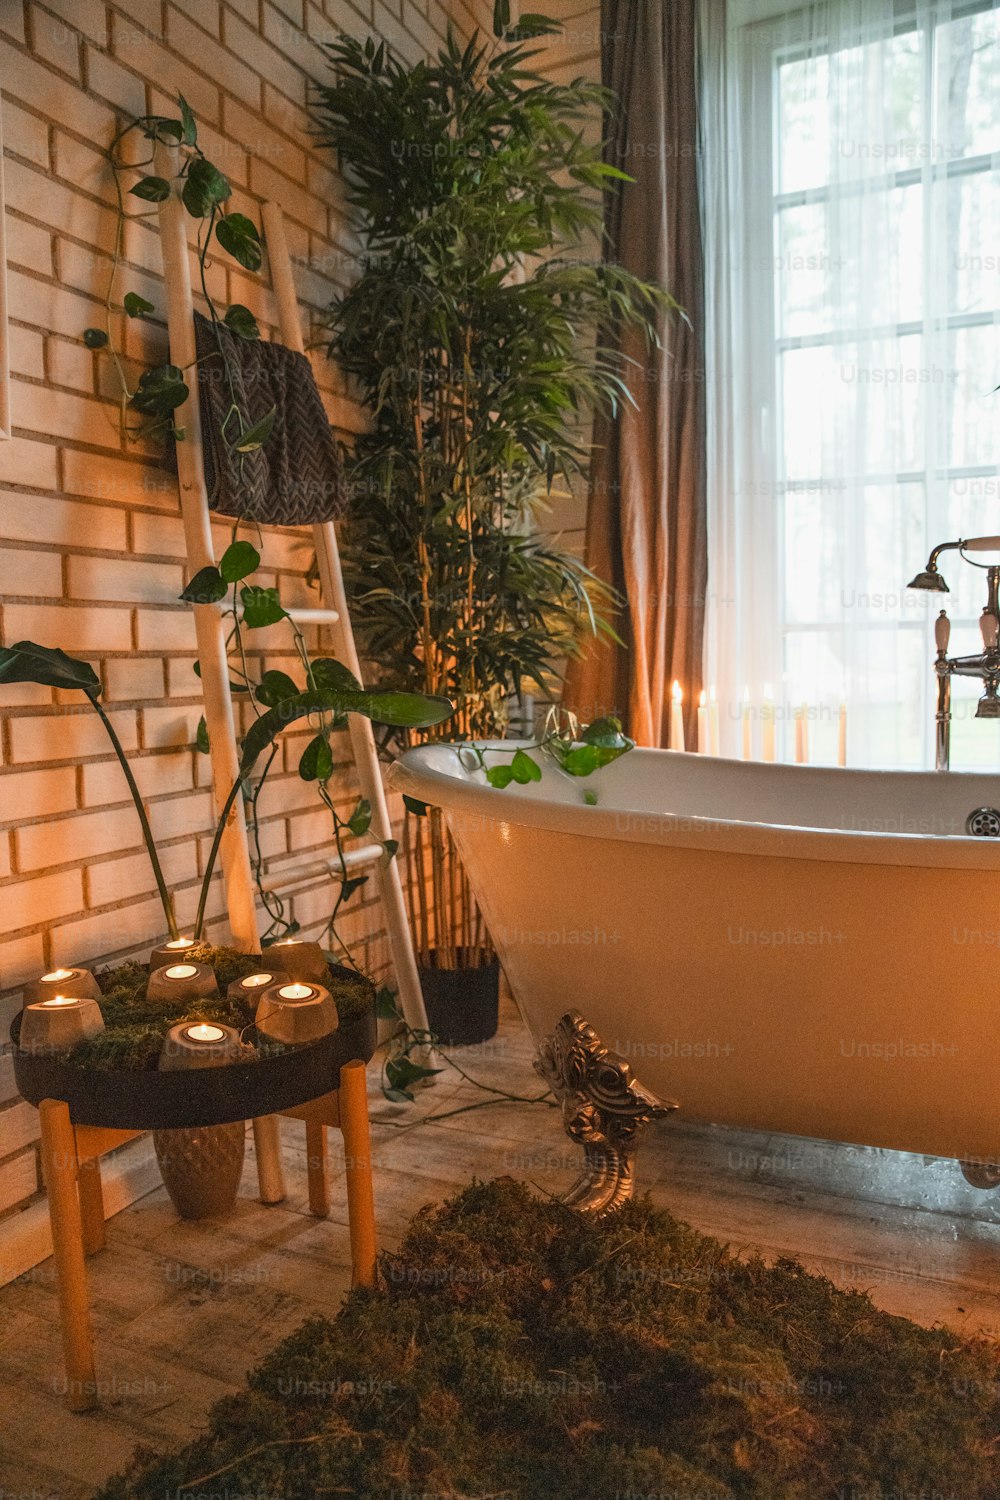 A bathroom with a claw foot tub and candles photo – Plants Image on Unsplash